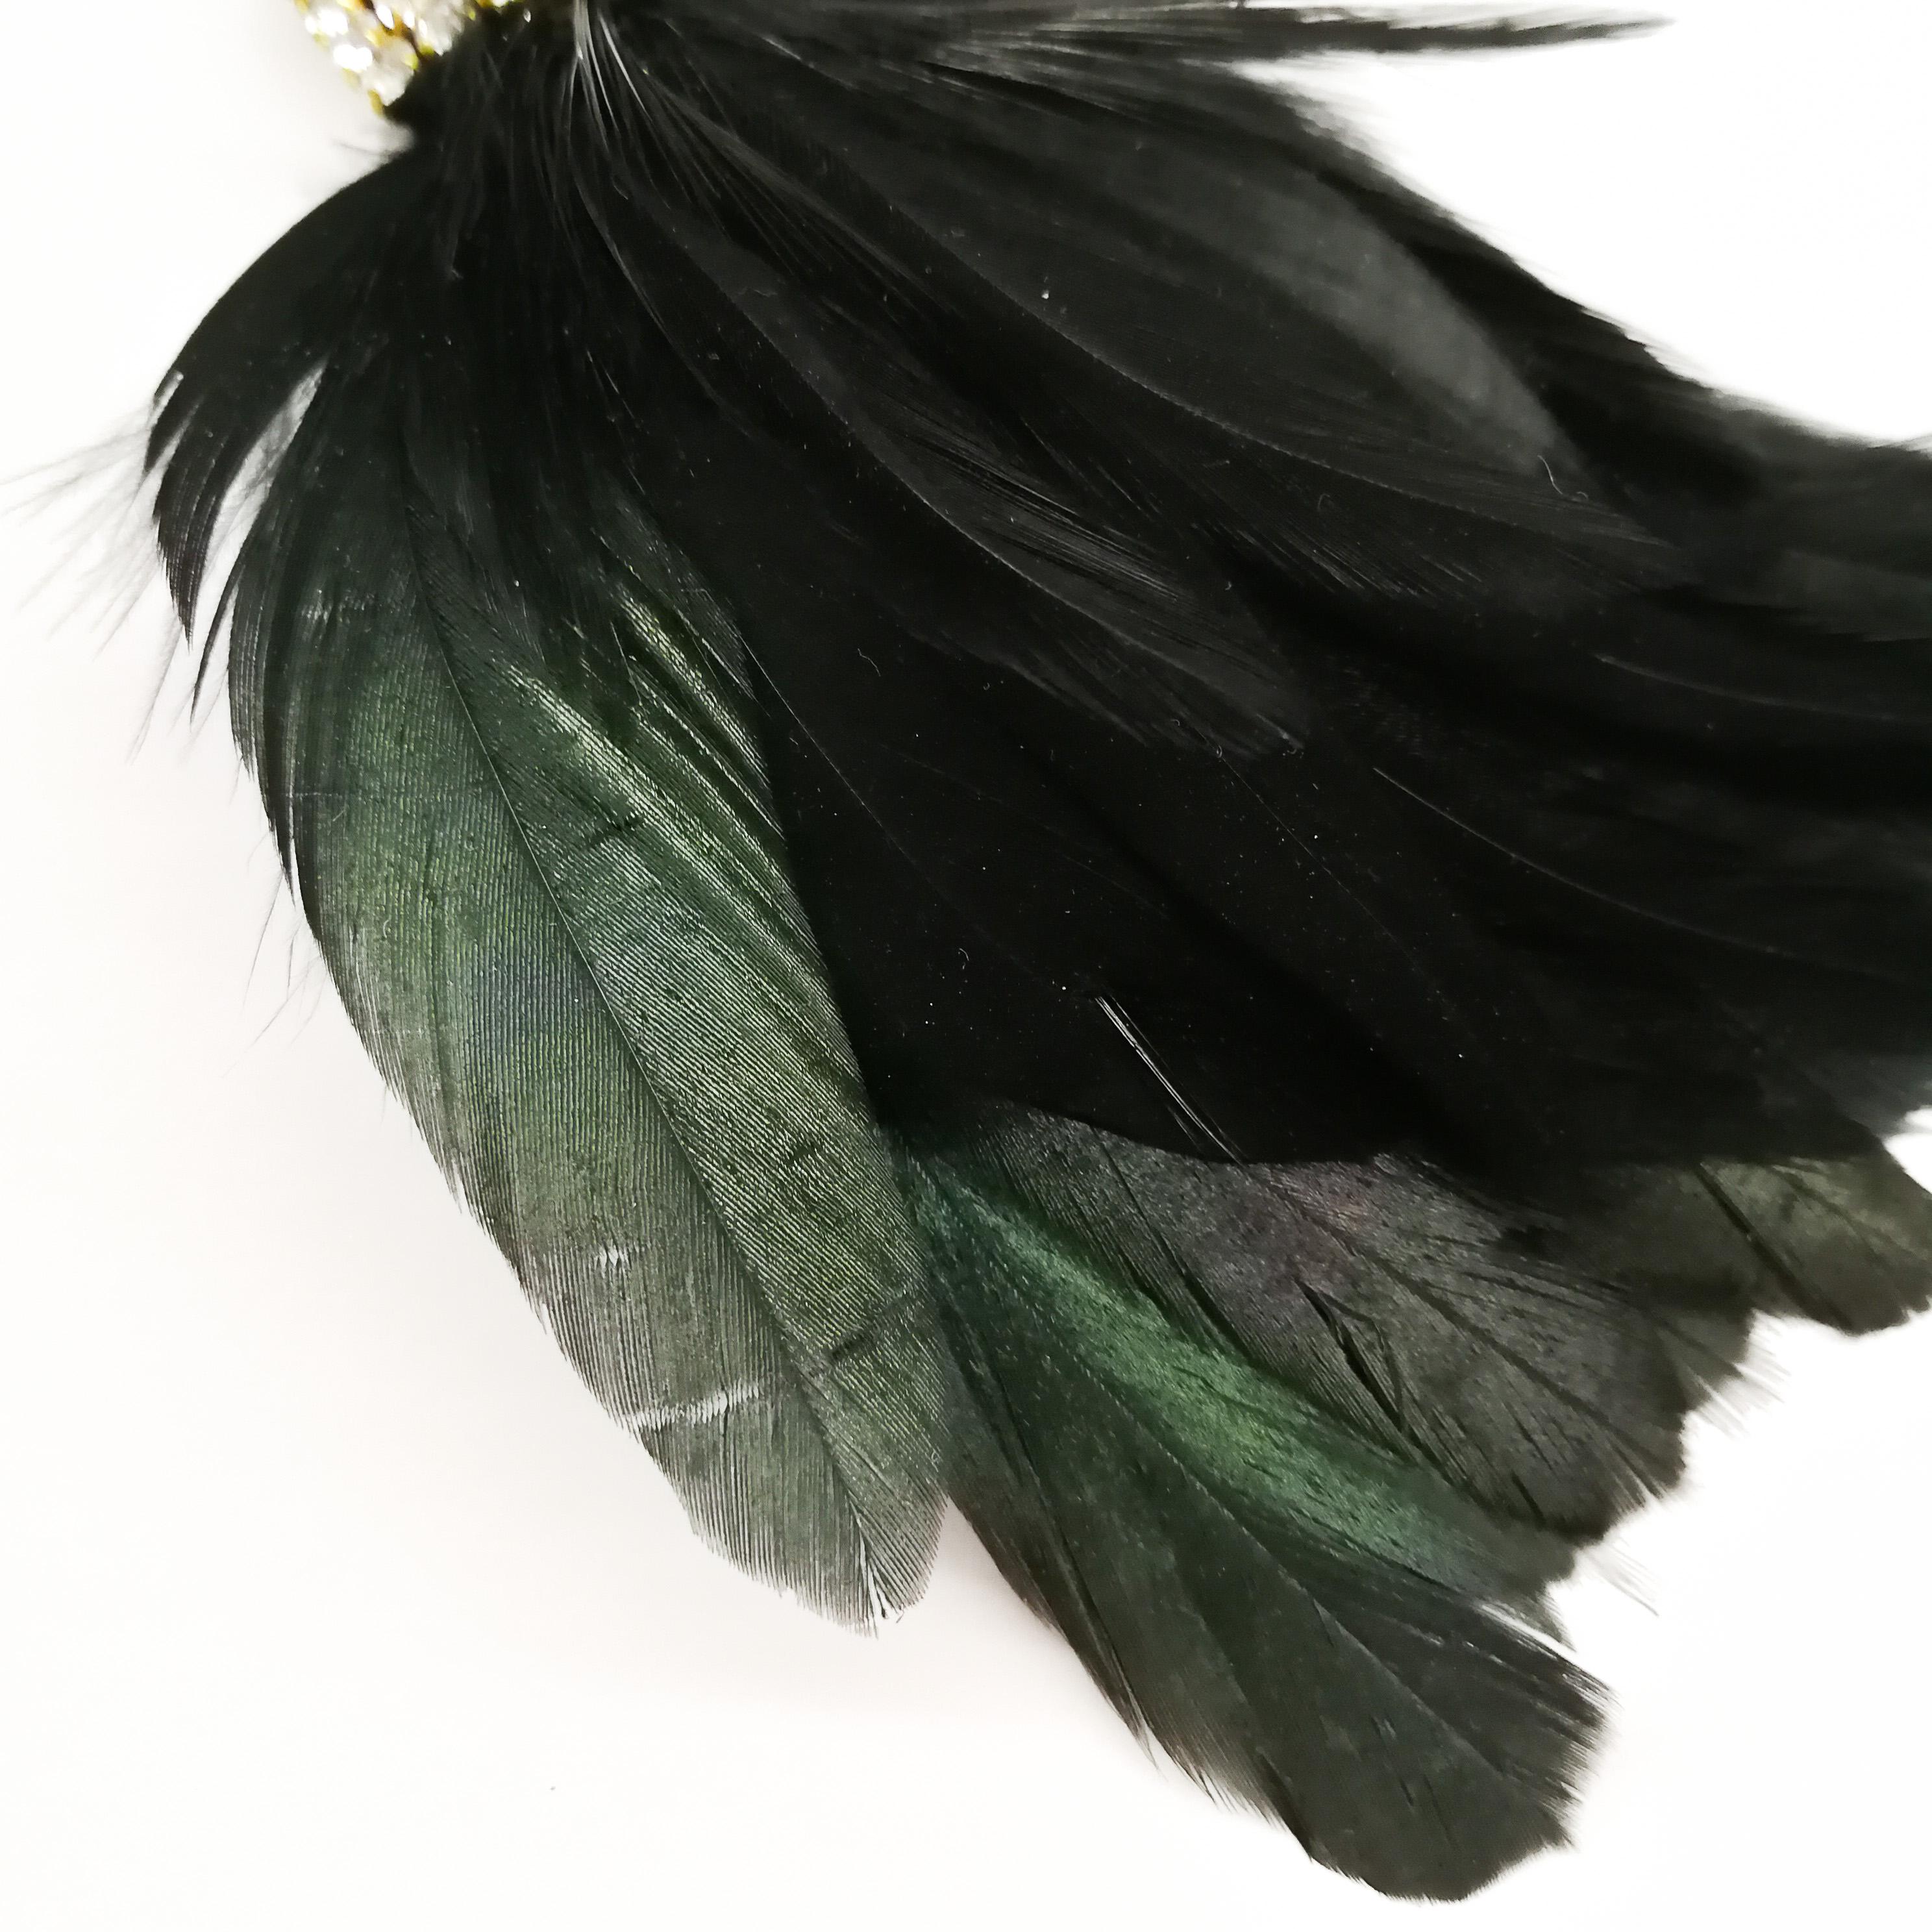 Magnificent and opulent large 'Bird Of Paradise' or 'Toucan' earrings by Isabel Canovas, made from gilded metal and lush feathers, with clear and sapphire paste highlights. The earrings have a clip on fitting, and hang down , with the bird's head on